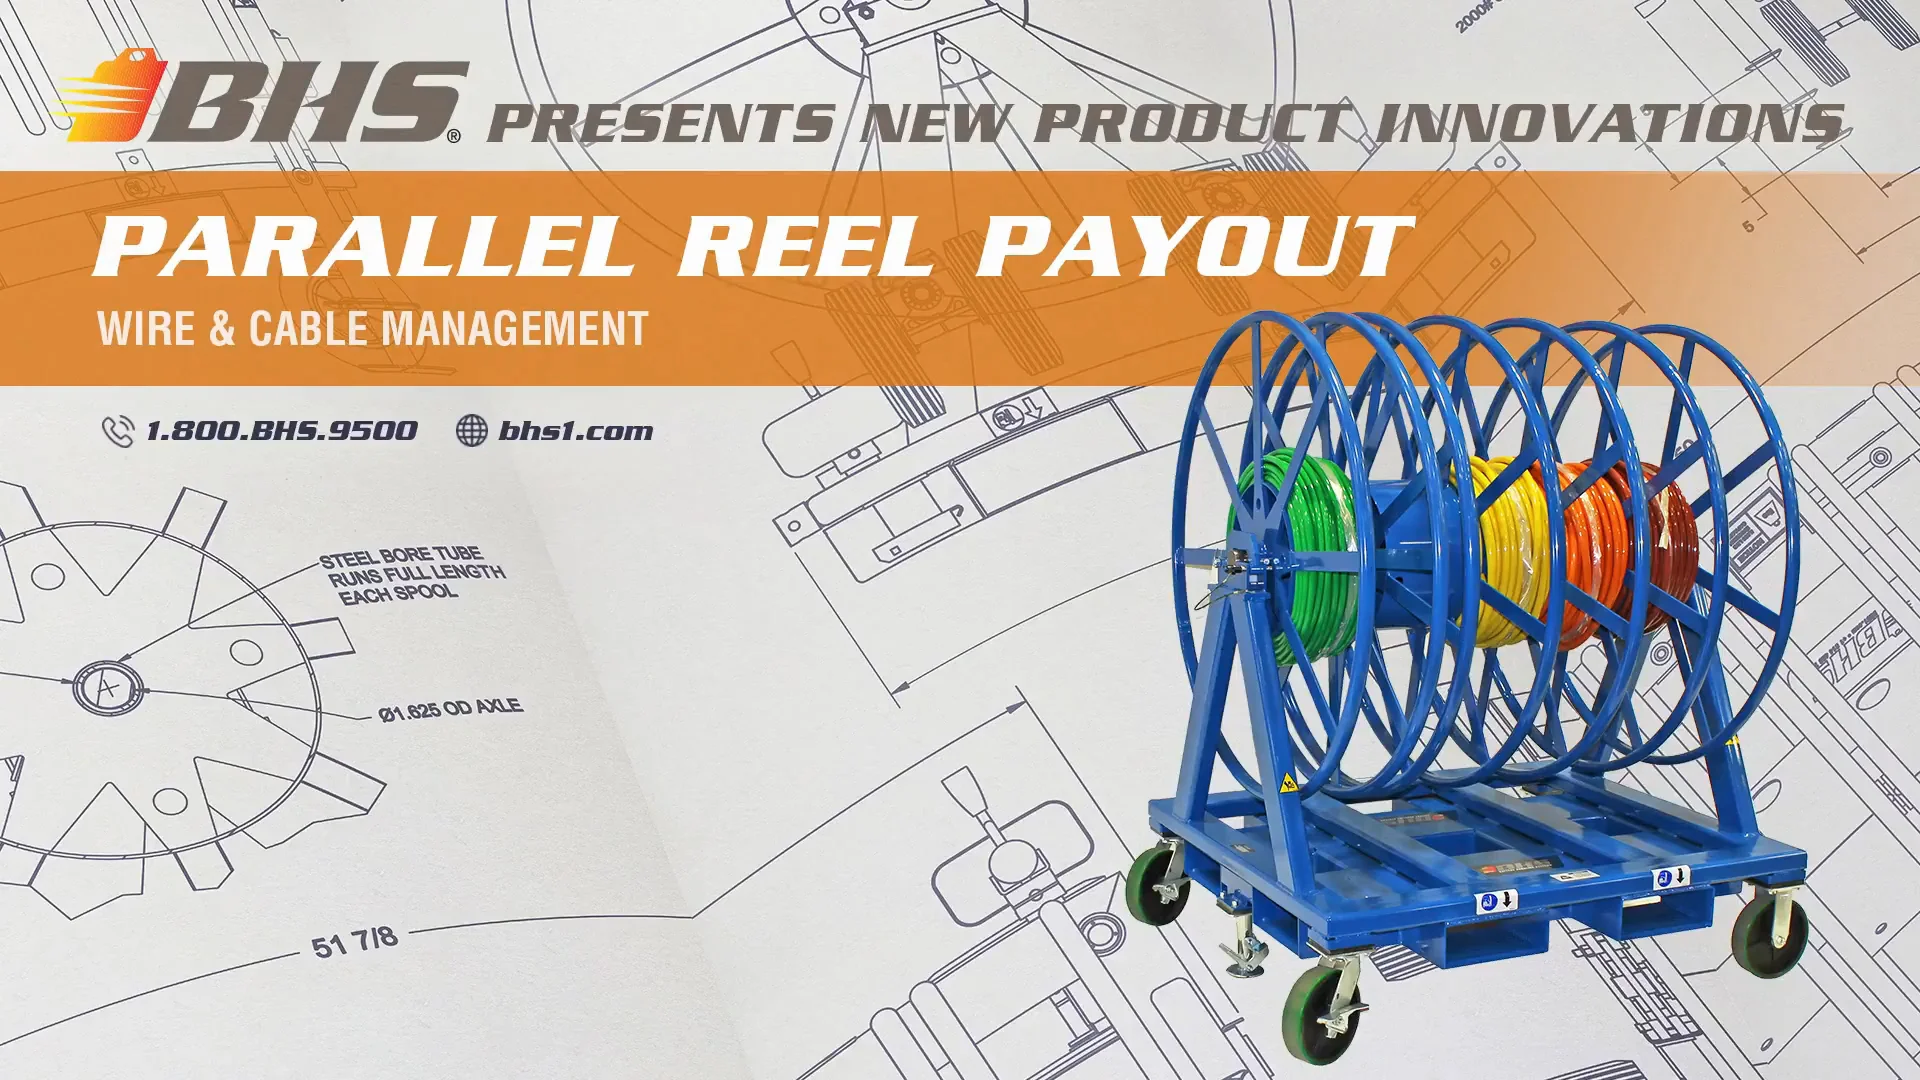 Parallel Reel Payout Trailer